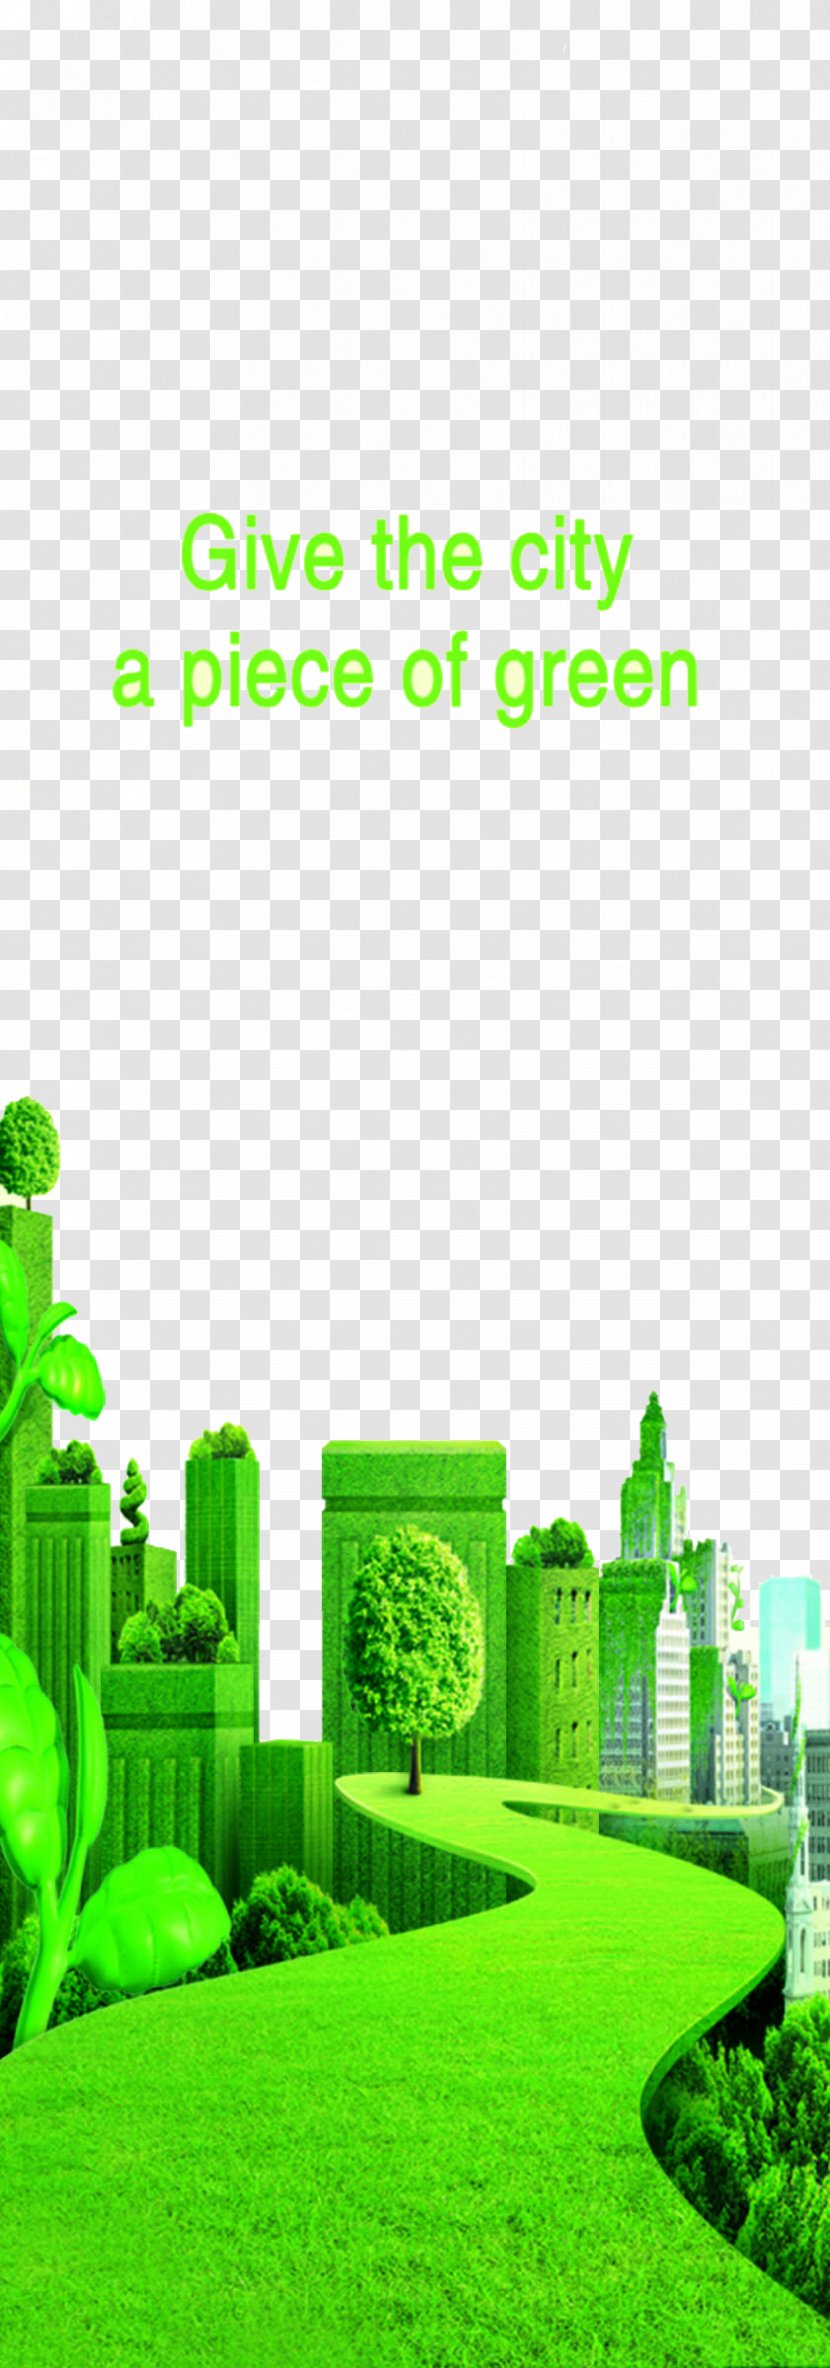 Green City - Give The A Environment Material Picture Transparent PNG